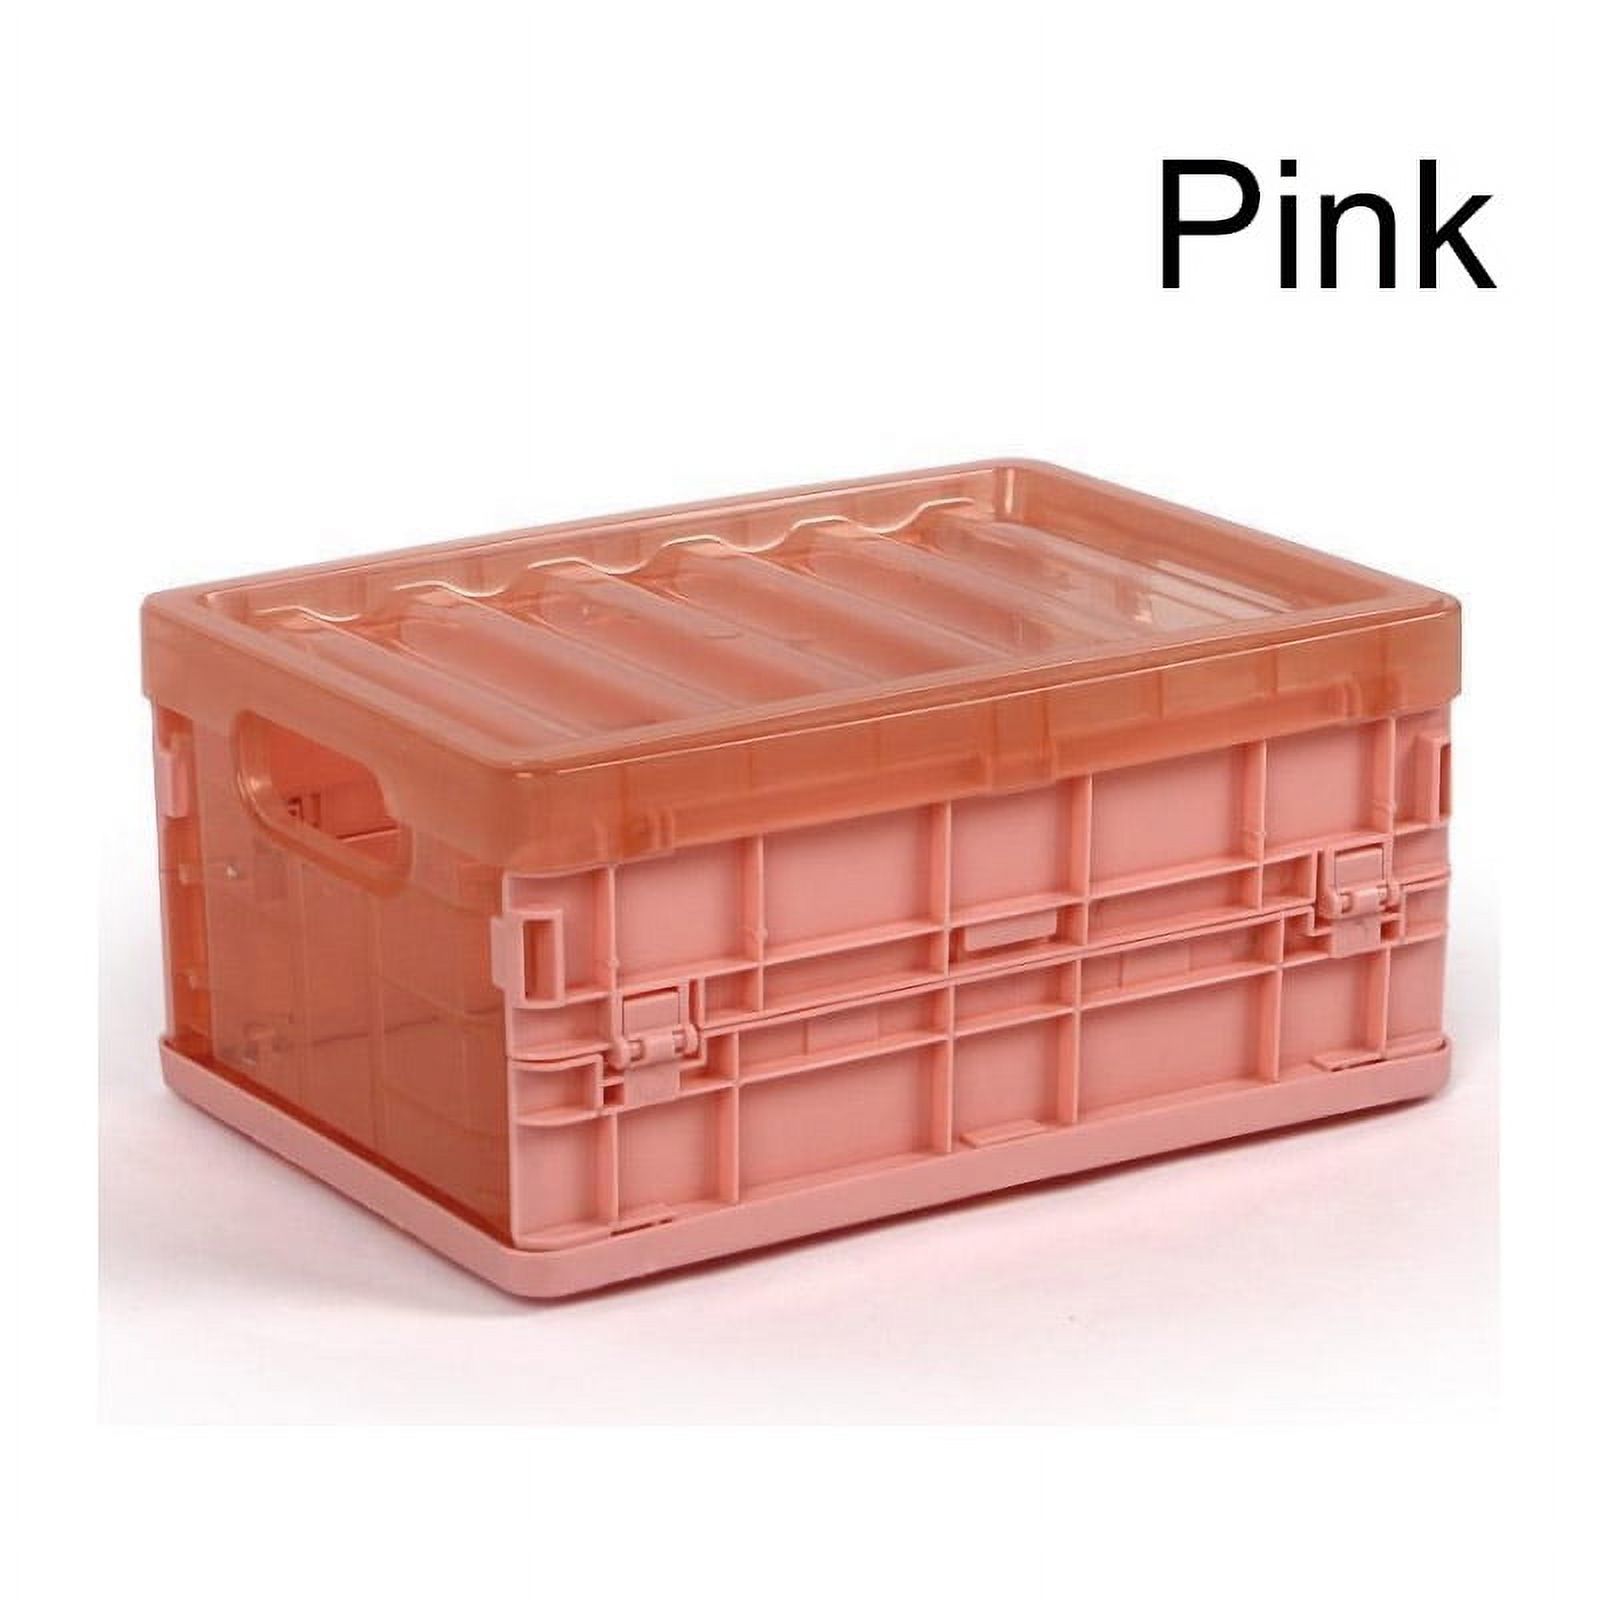 Foldable Plastic Storage Container Basket With Lid, Thickened Student Organizer Box, Simple Plastic Box, Storage Boxes Used for Wardrobe/Clothing/Books - image 1 of 8